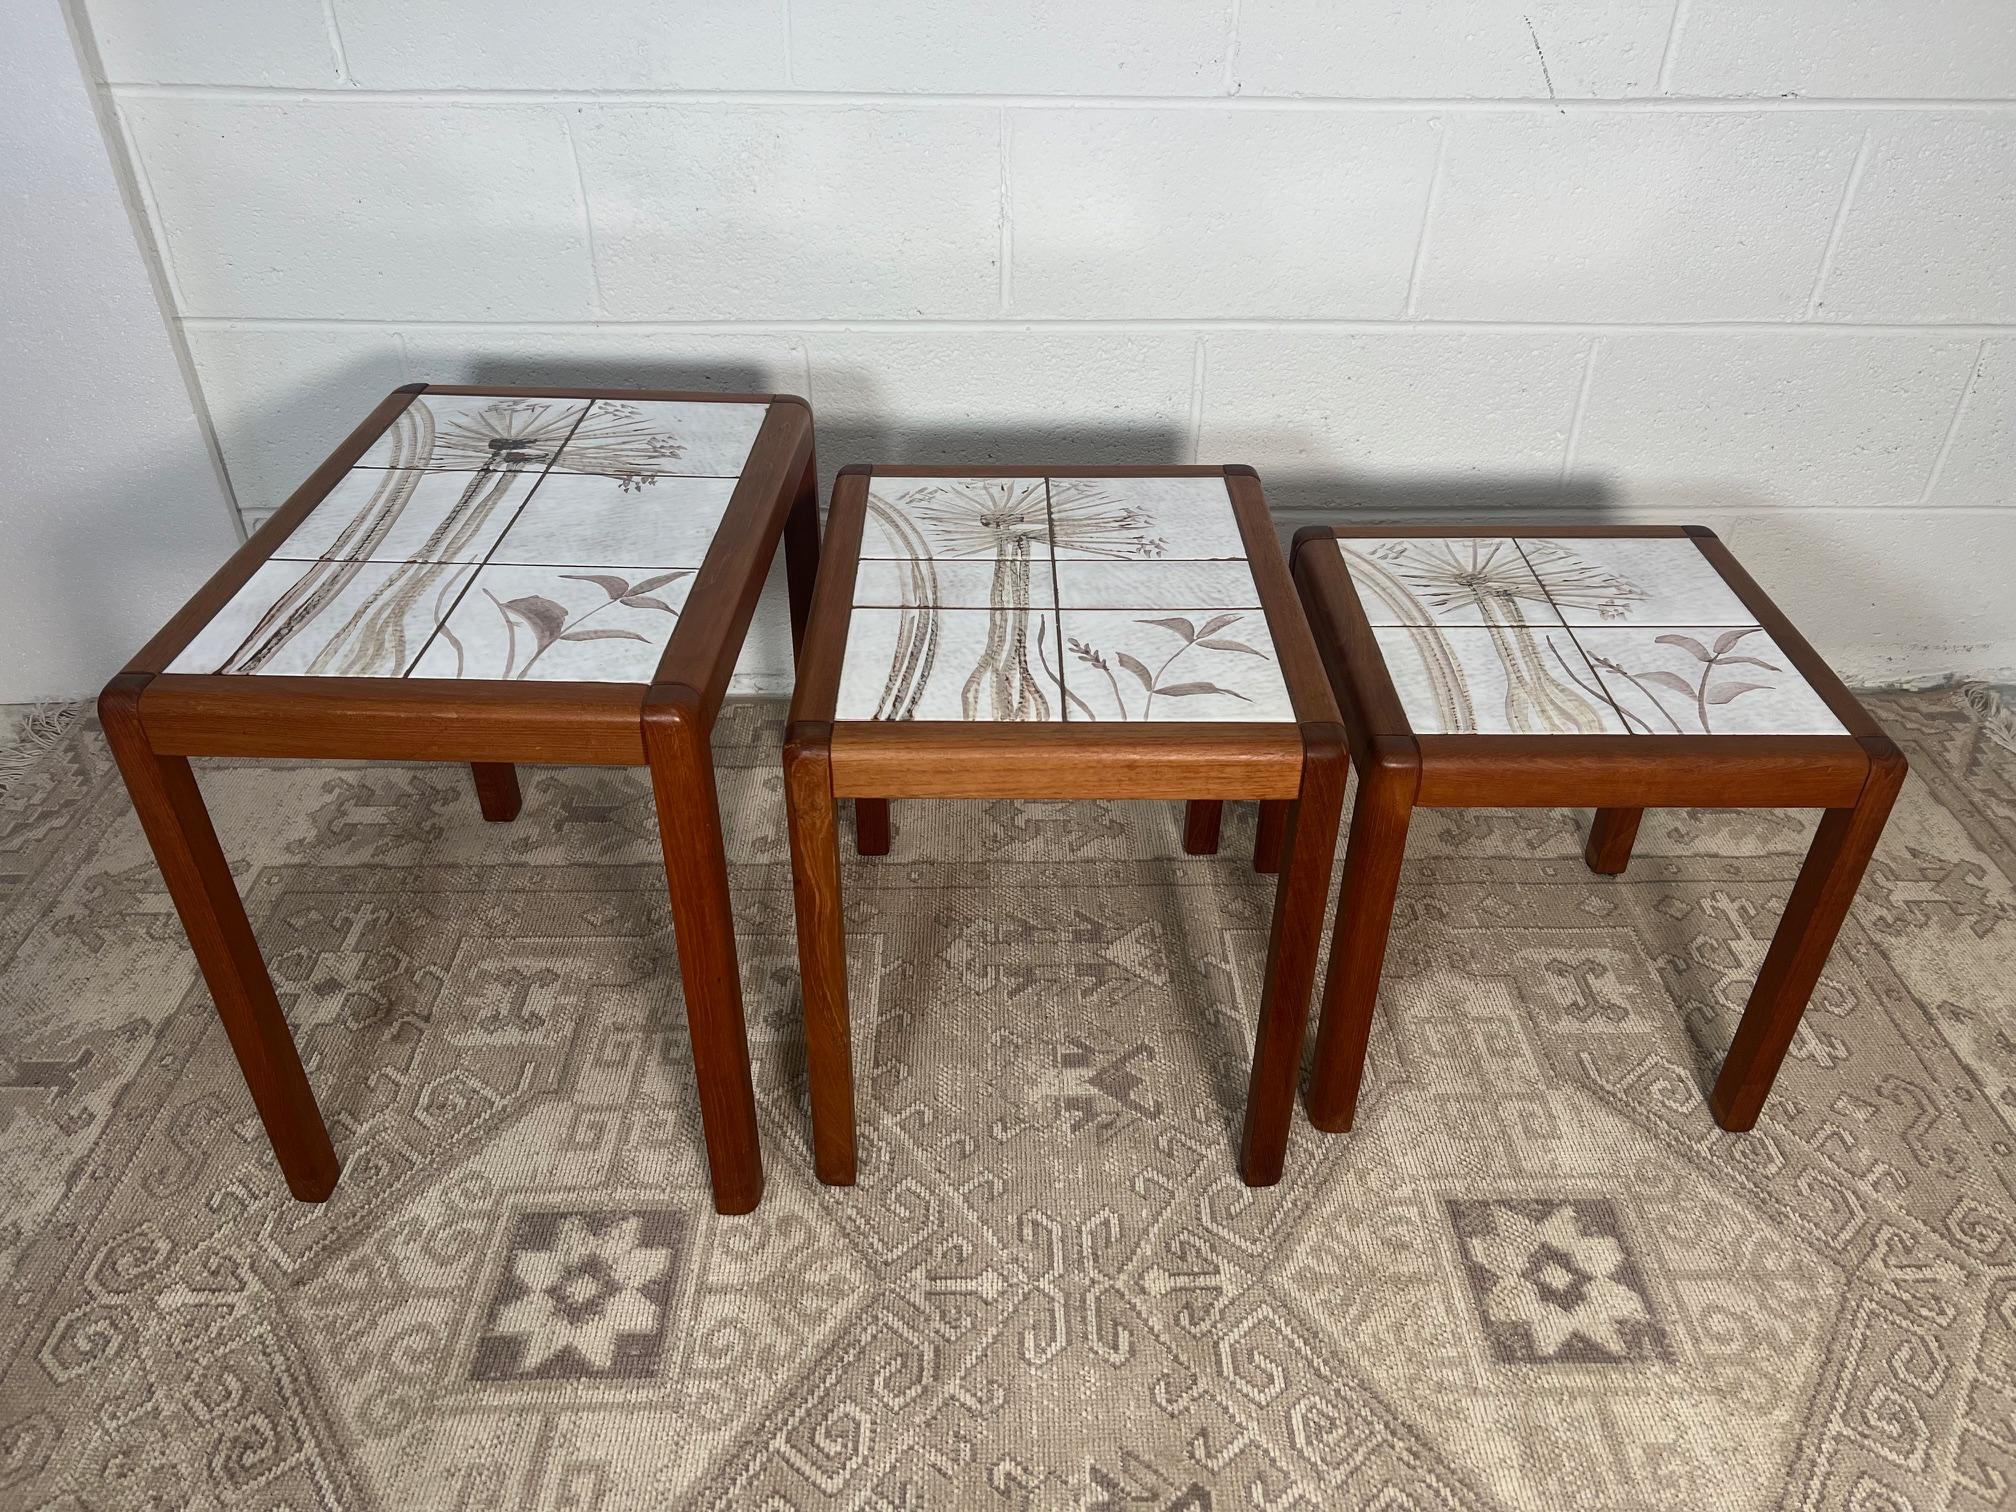 Mid-century modern teak and tile nesting side tables. Made in Denmark. Stamped underneath. Very good condition. Very minor marks.

Dimensions: L x W x D

20.25